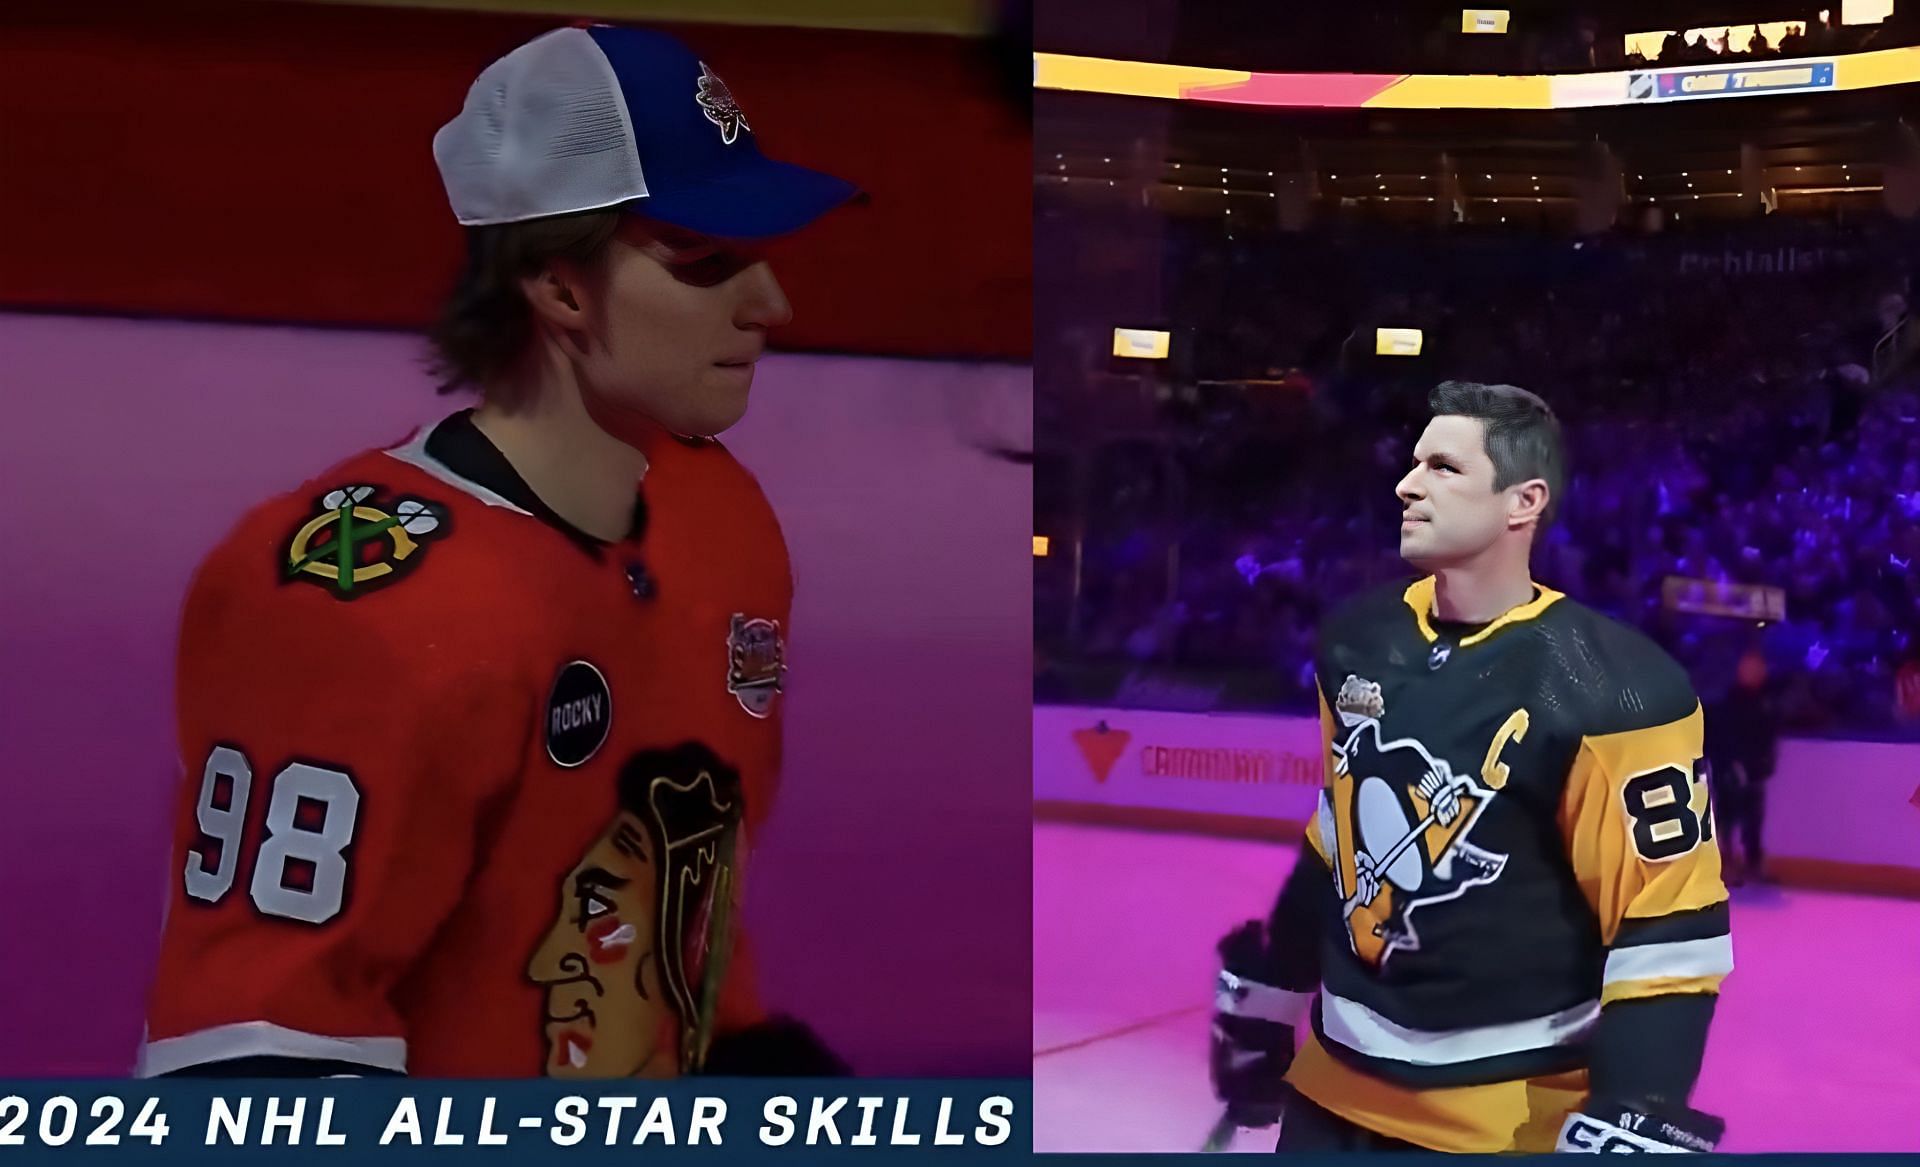 Watch: Connor Bedard makes special appearance alongside idol Sidney Crosby at NHL All-Star Skills competition